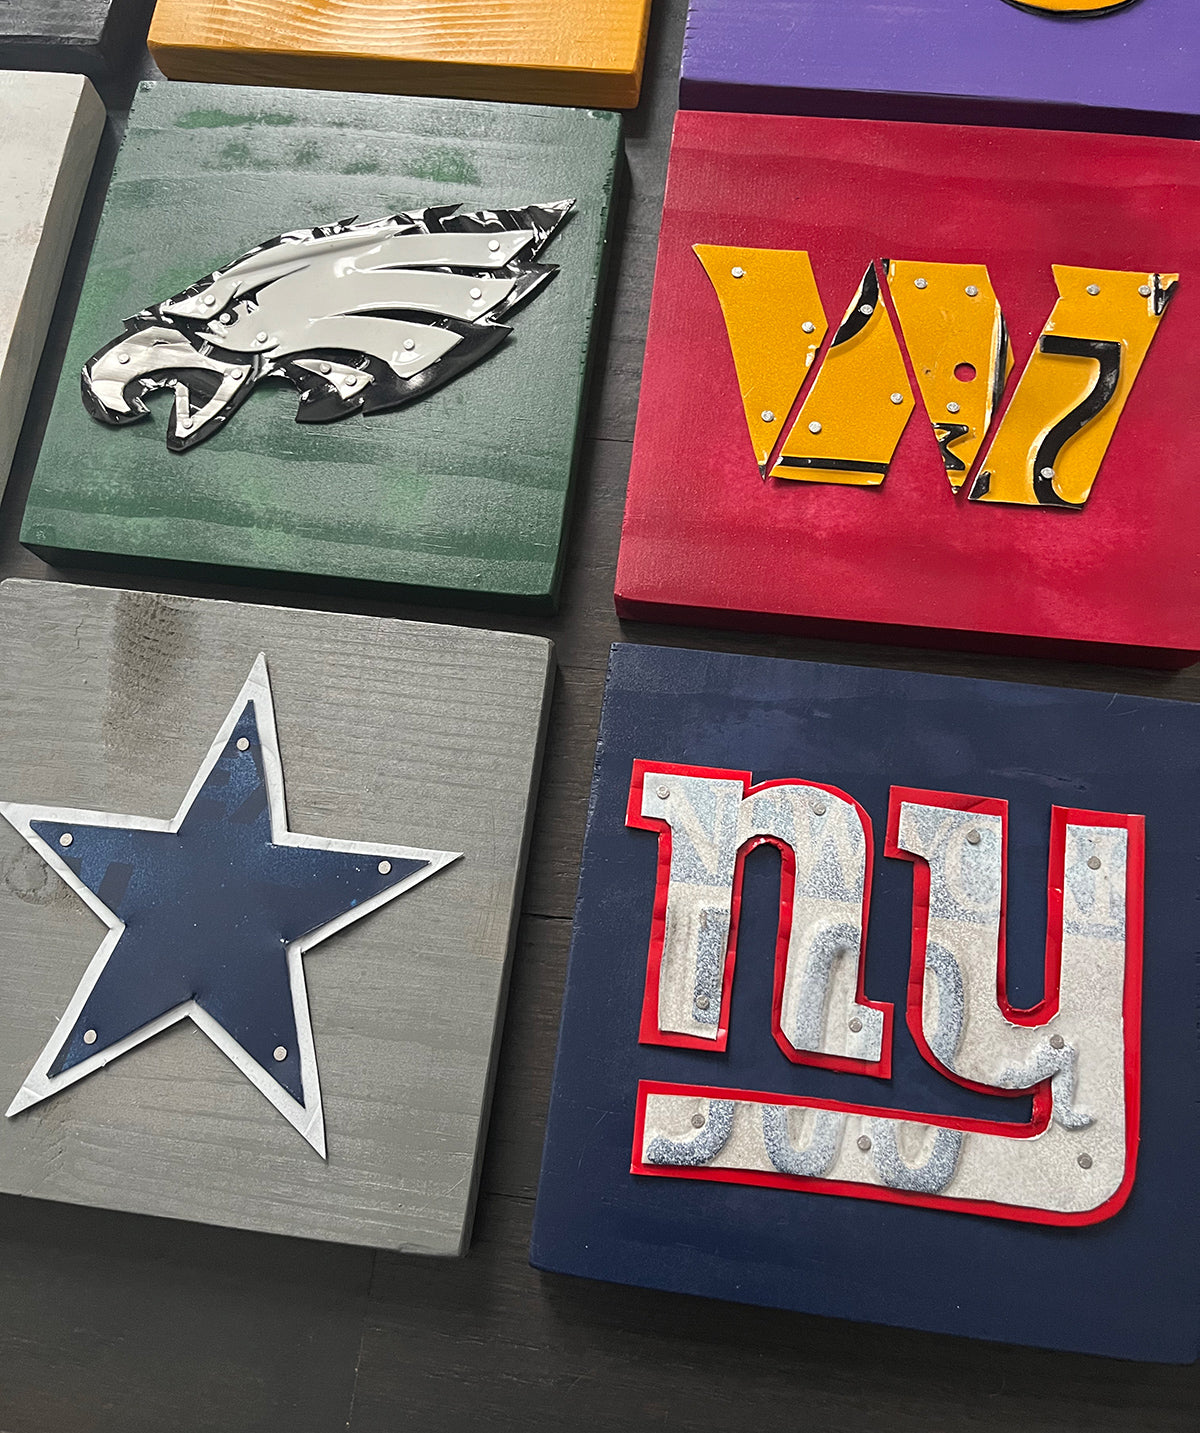 NFL Team Logo License Plate Art 7 x 7 with display stand